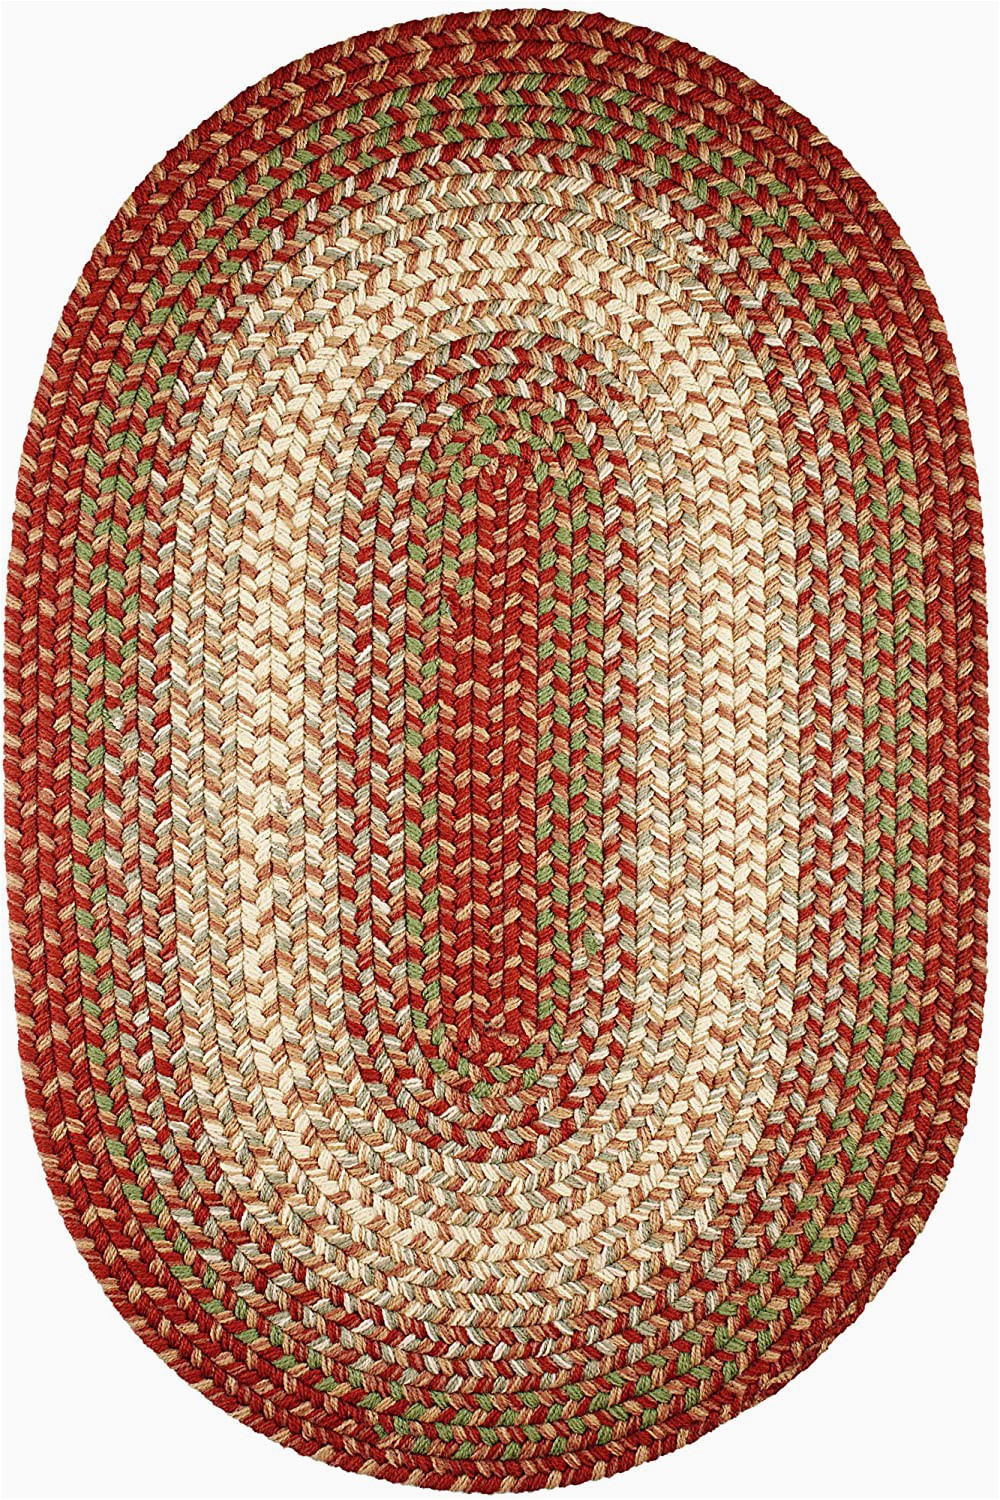 7 X 9 Oval area Rugs Super area Rugs Hartford 7 X 9 Oval Braided Rug Rusty Red & Green Indoor Outdoor Rug Primitive Washable Carpet